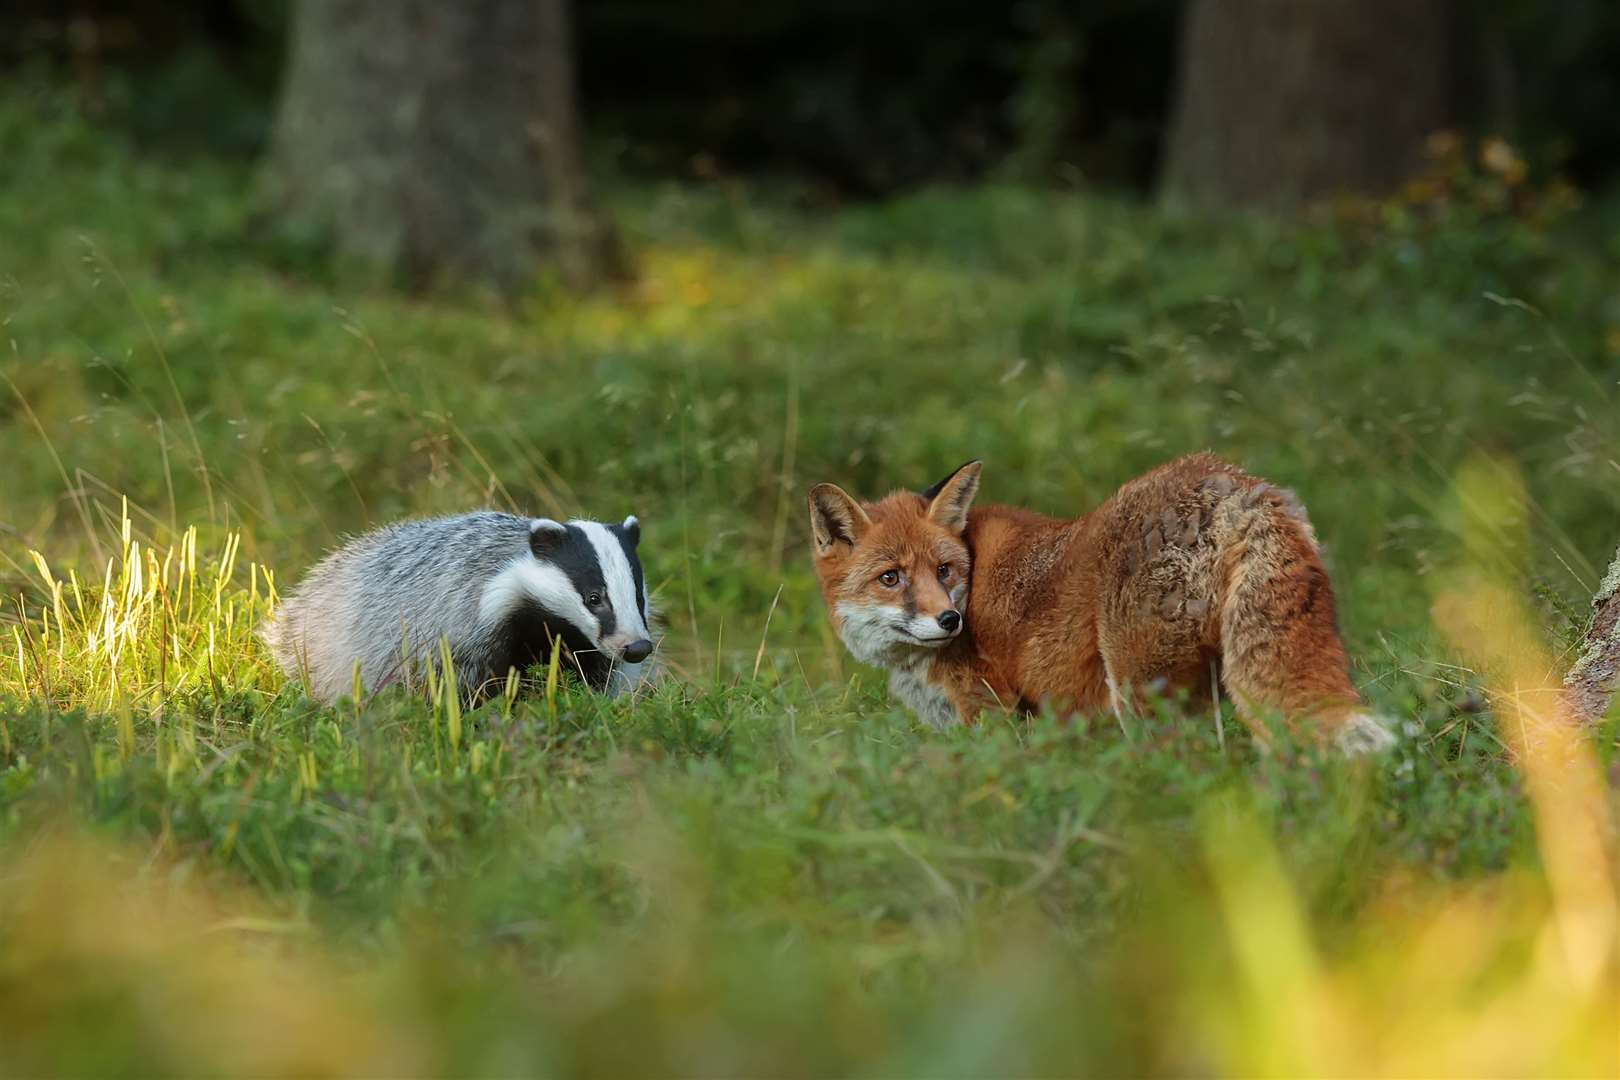 The study shows that foxes were to blame for predation on lambs on Scottish farms, not badgers. Picture: Adobe Stock